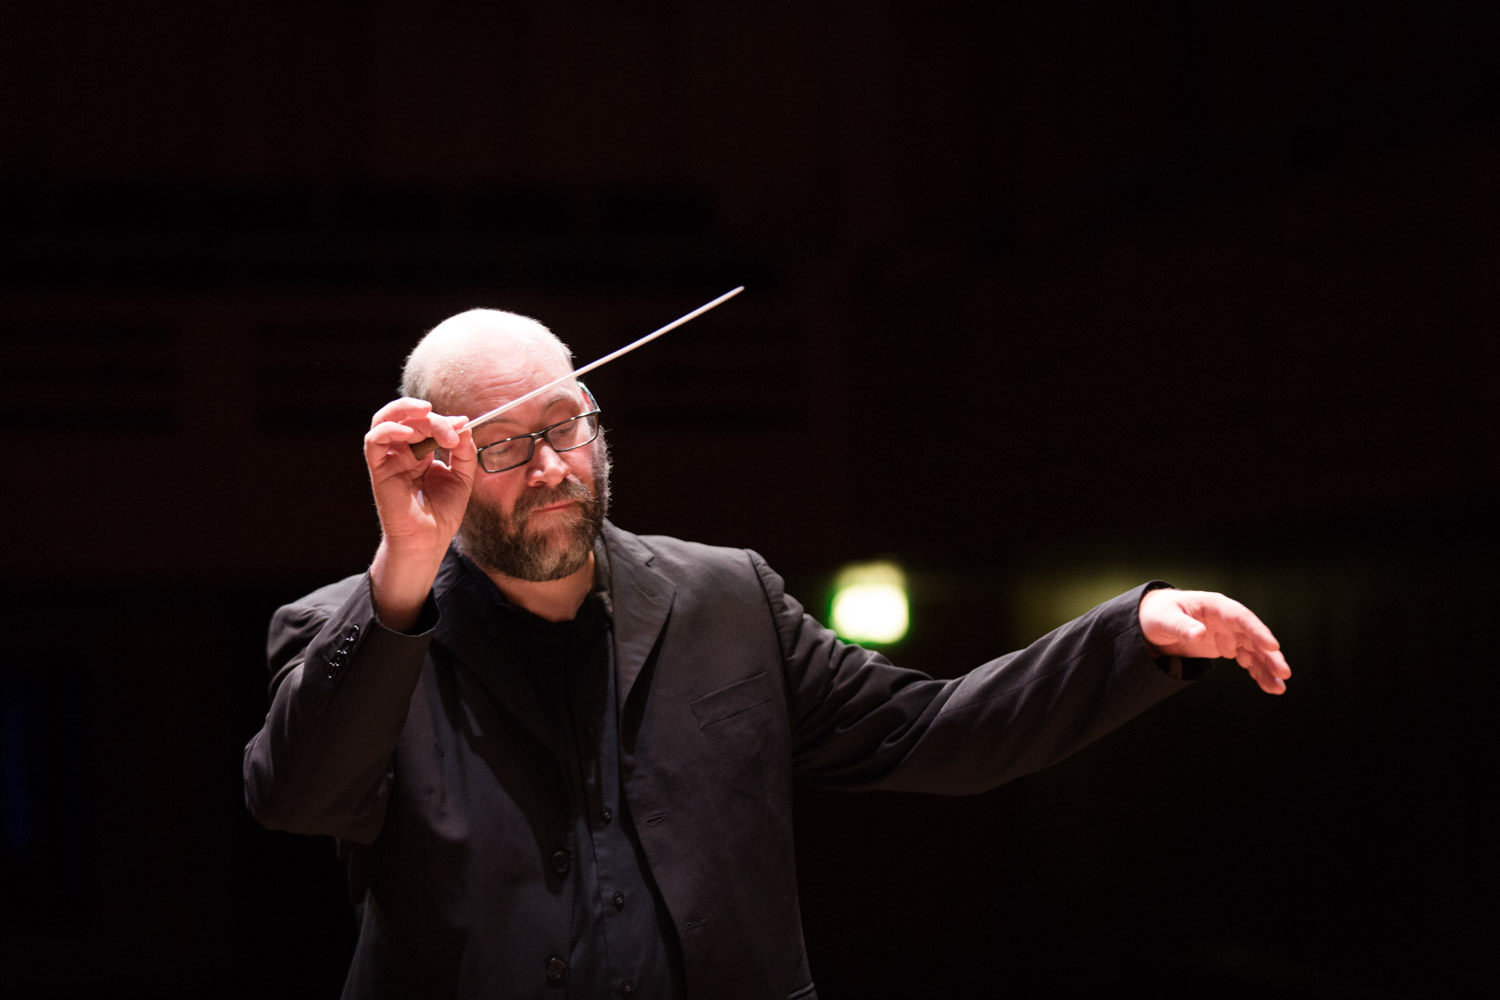 Concert Review- Classical Source on ESO at Kings Place